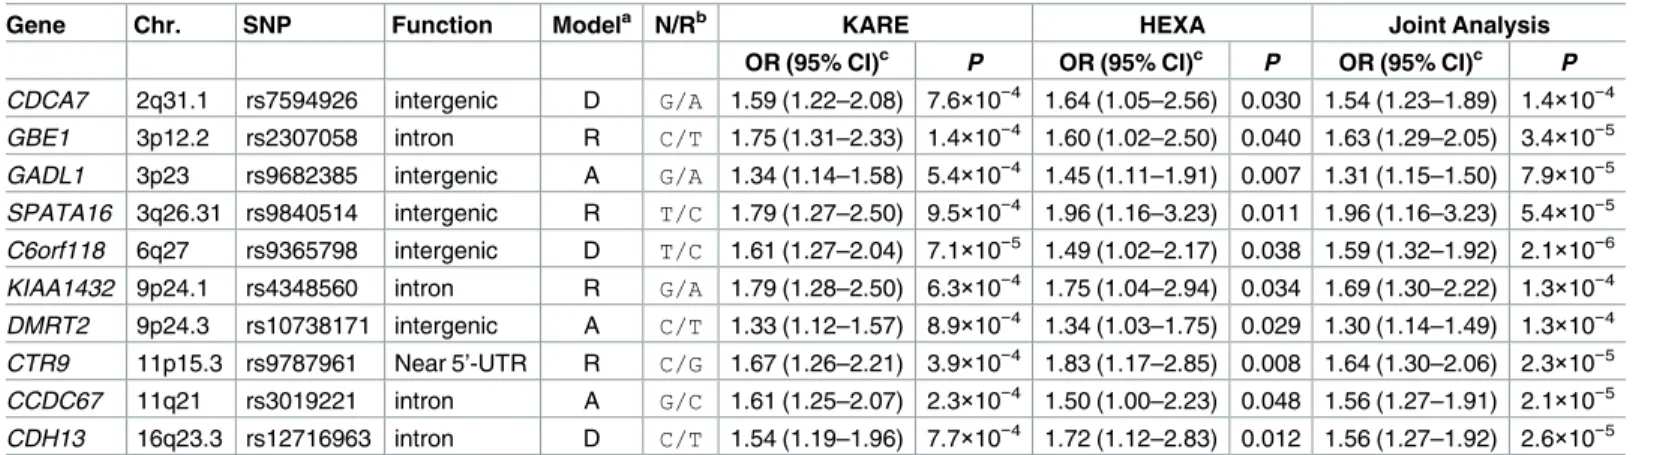 Table 3. Ten replicated SNPs associated with PTB in the KARE and HEXA Studies.